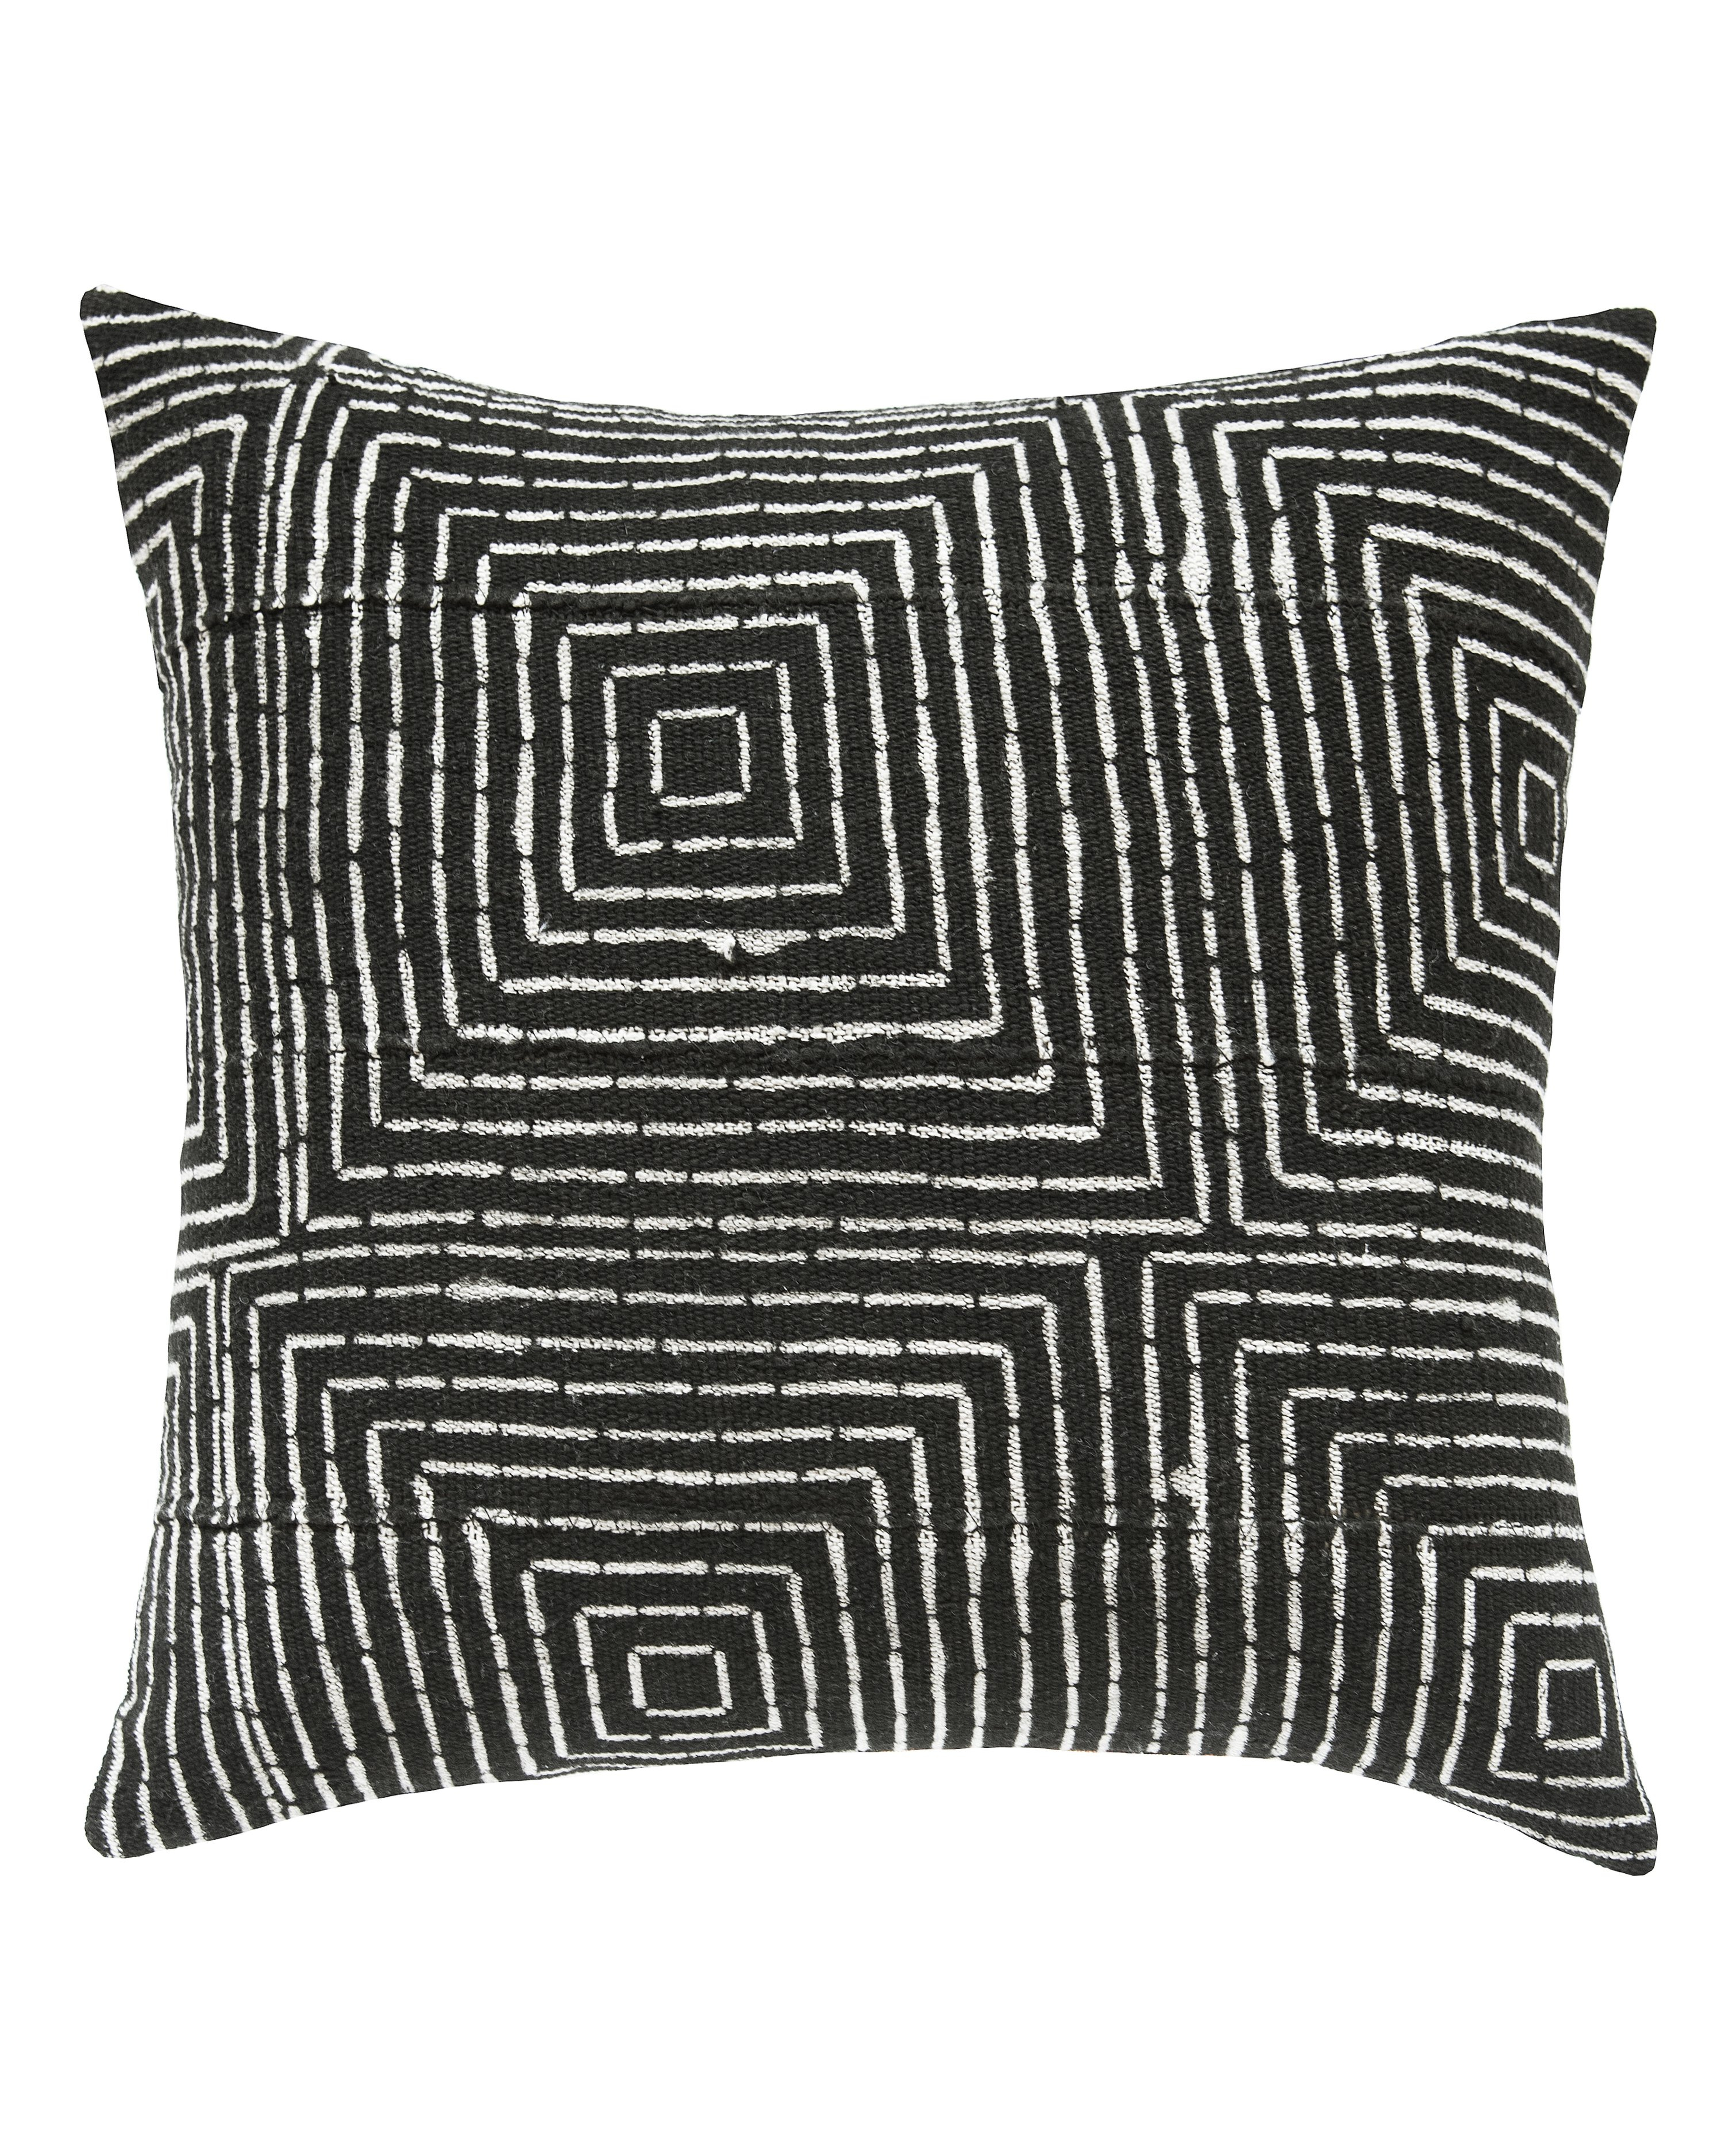 vanishing squares mud cloth pillow in black - with insert - PillowPia